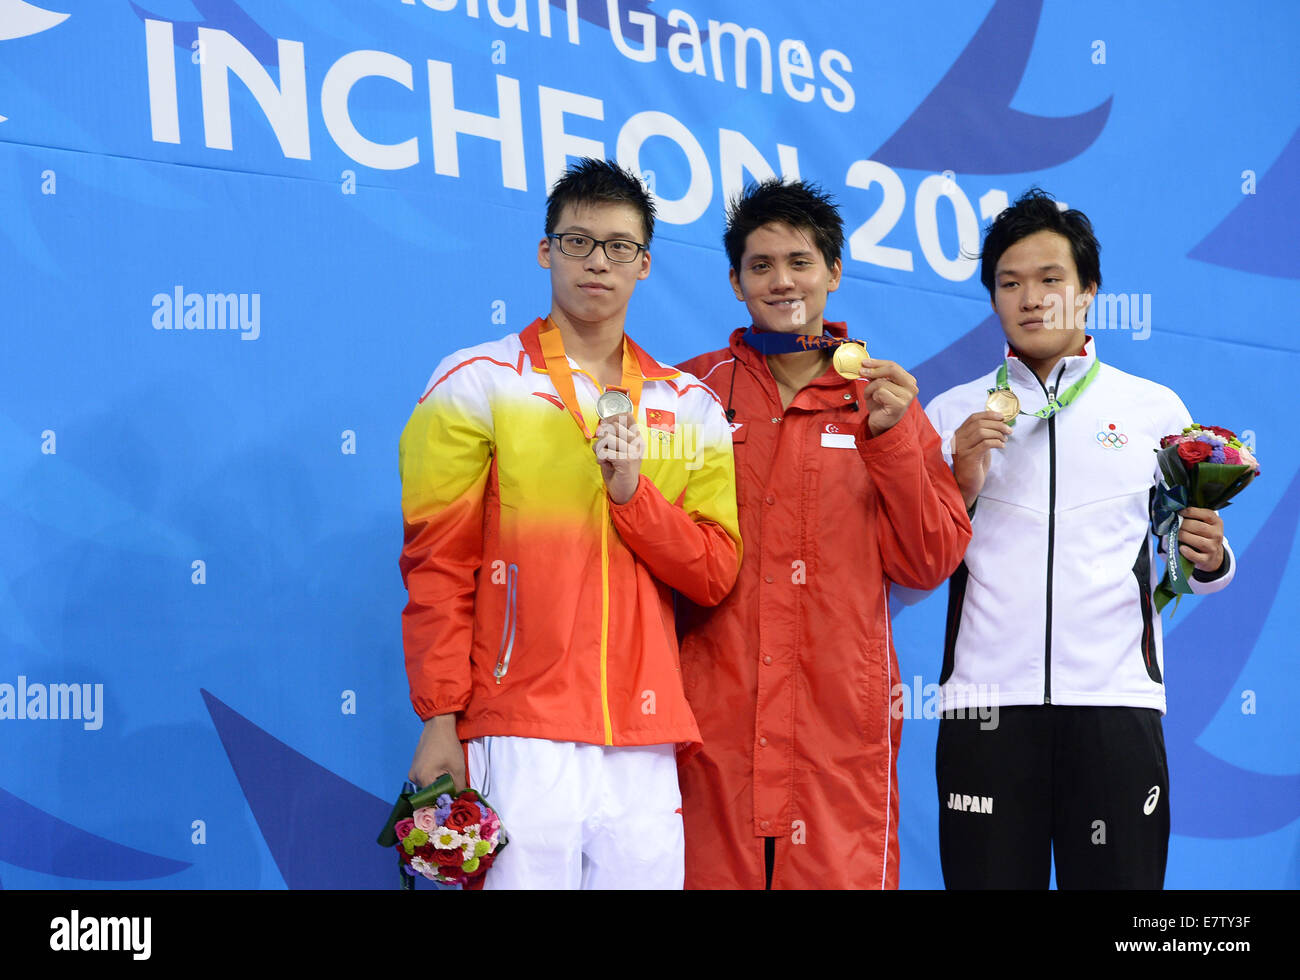 Incheon, South Korea. 24th Sep, 2014. Gold medalist Schooling Joseph Isaac (C) of Singapore, silver medalist Li Zhuhao (L) of China and bronze medalist Ikebata Hirofumi of Japan pose on the podium during the awarding ceremony of the men's 100m butterfly contest of swimming event at the 17th Asian Games in Incheon, South Korea, Sept. 24, 2014. Credit:  Wang Peng/Xinhua/Alamy Live News Stock Photo